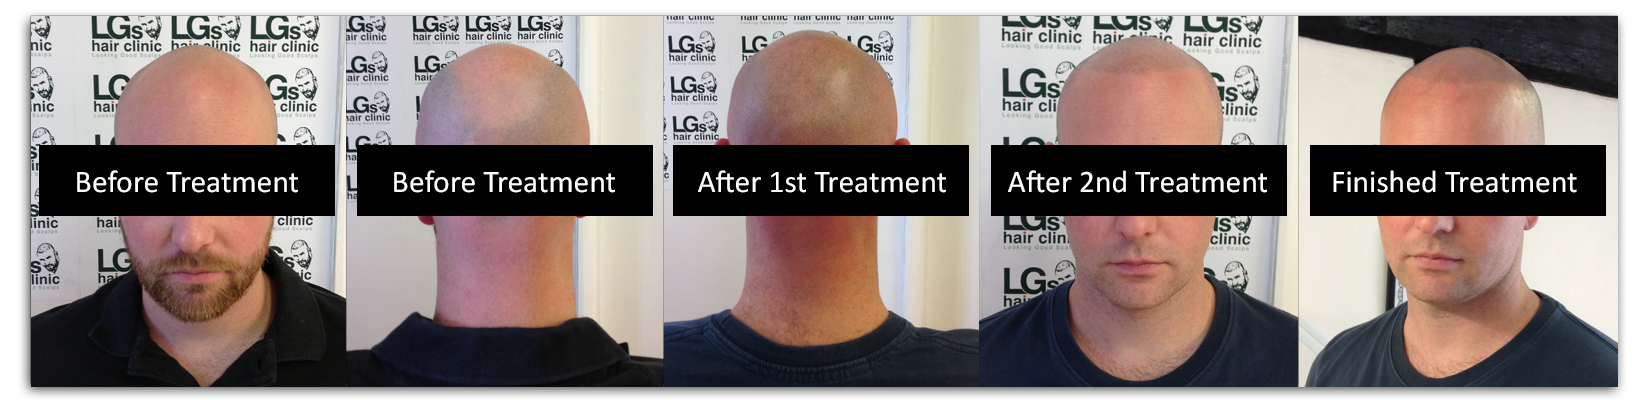 ... Hair Falling And Recover New Hair | Complete Hair Baldness-LGs Hair